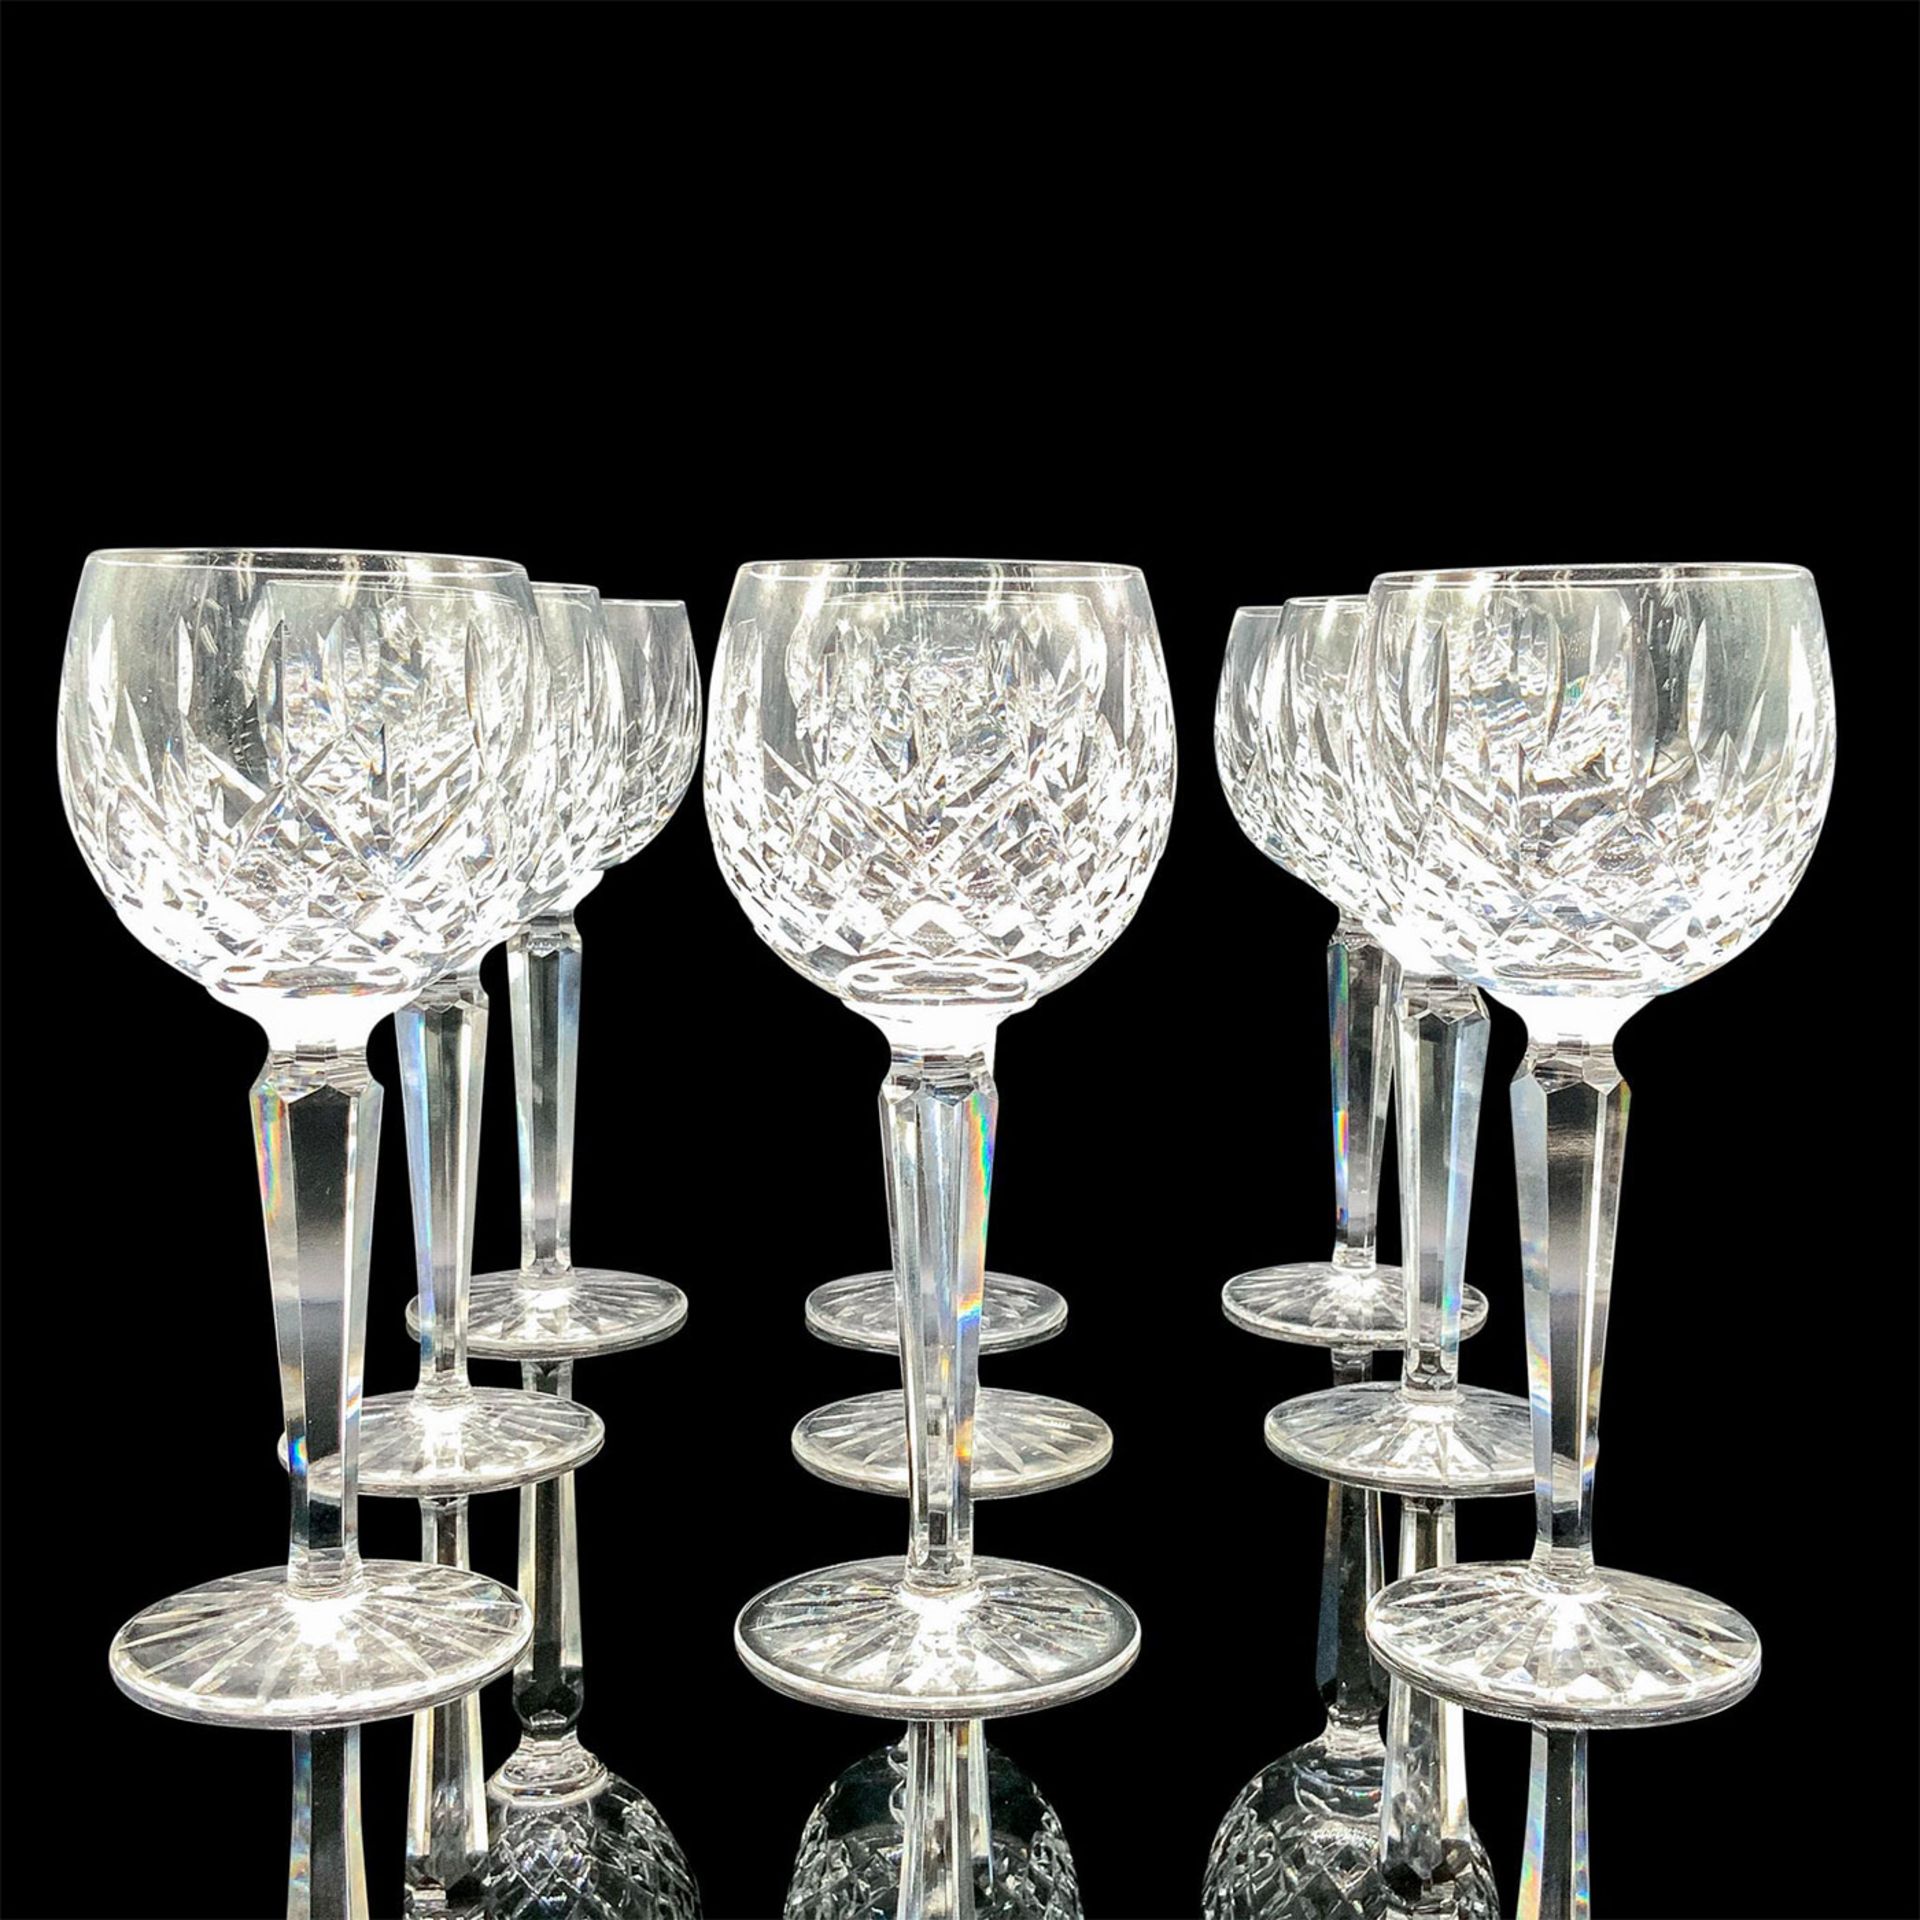 9pc Waterford Lismore Crystal Wine Glasses - Image 2 of 4